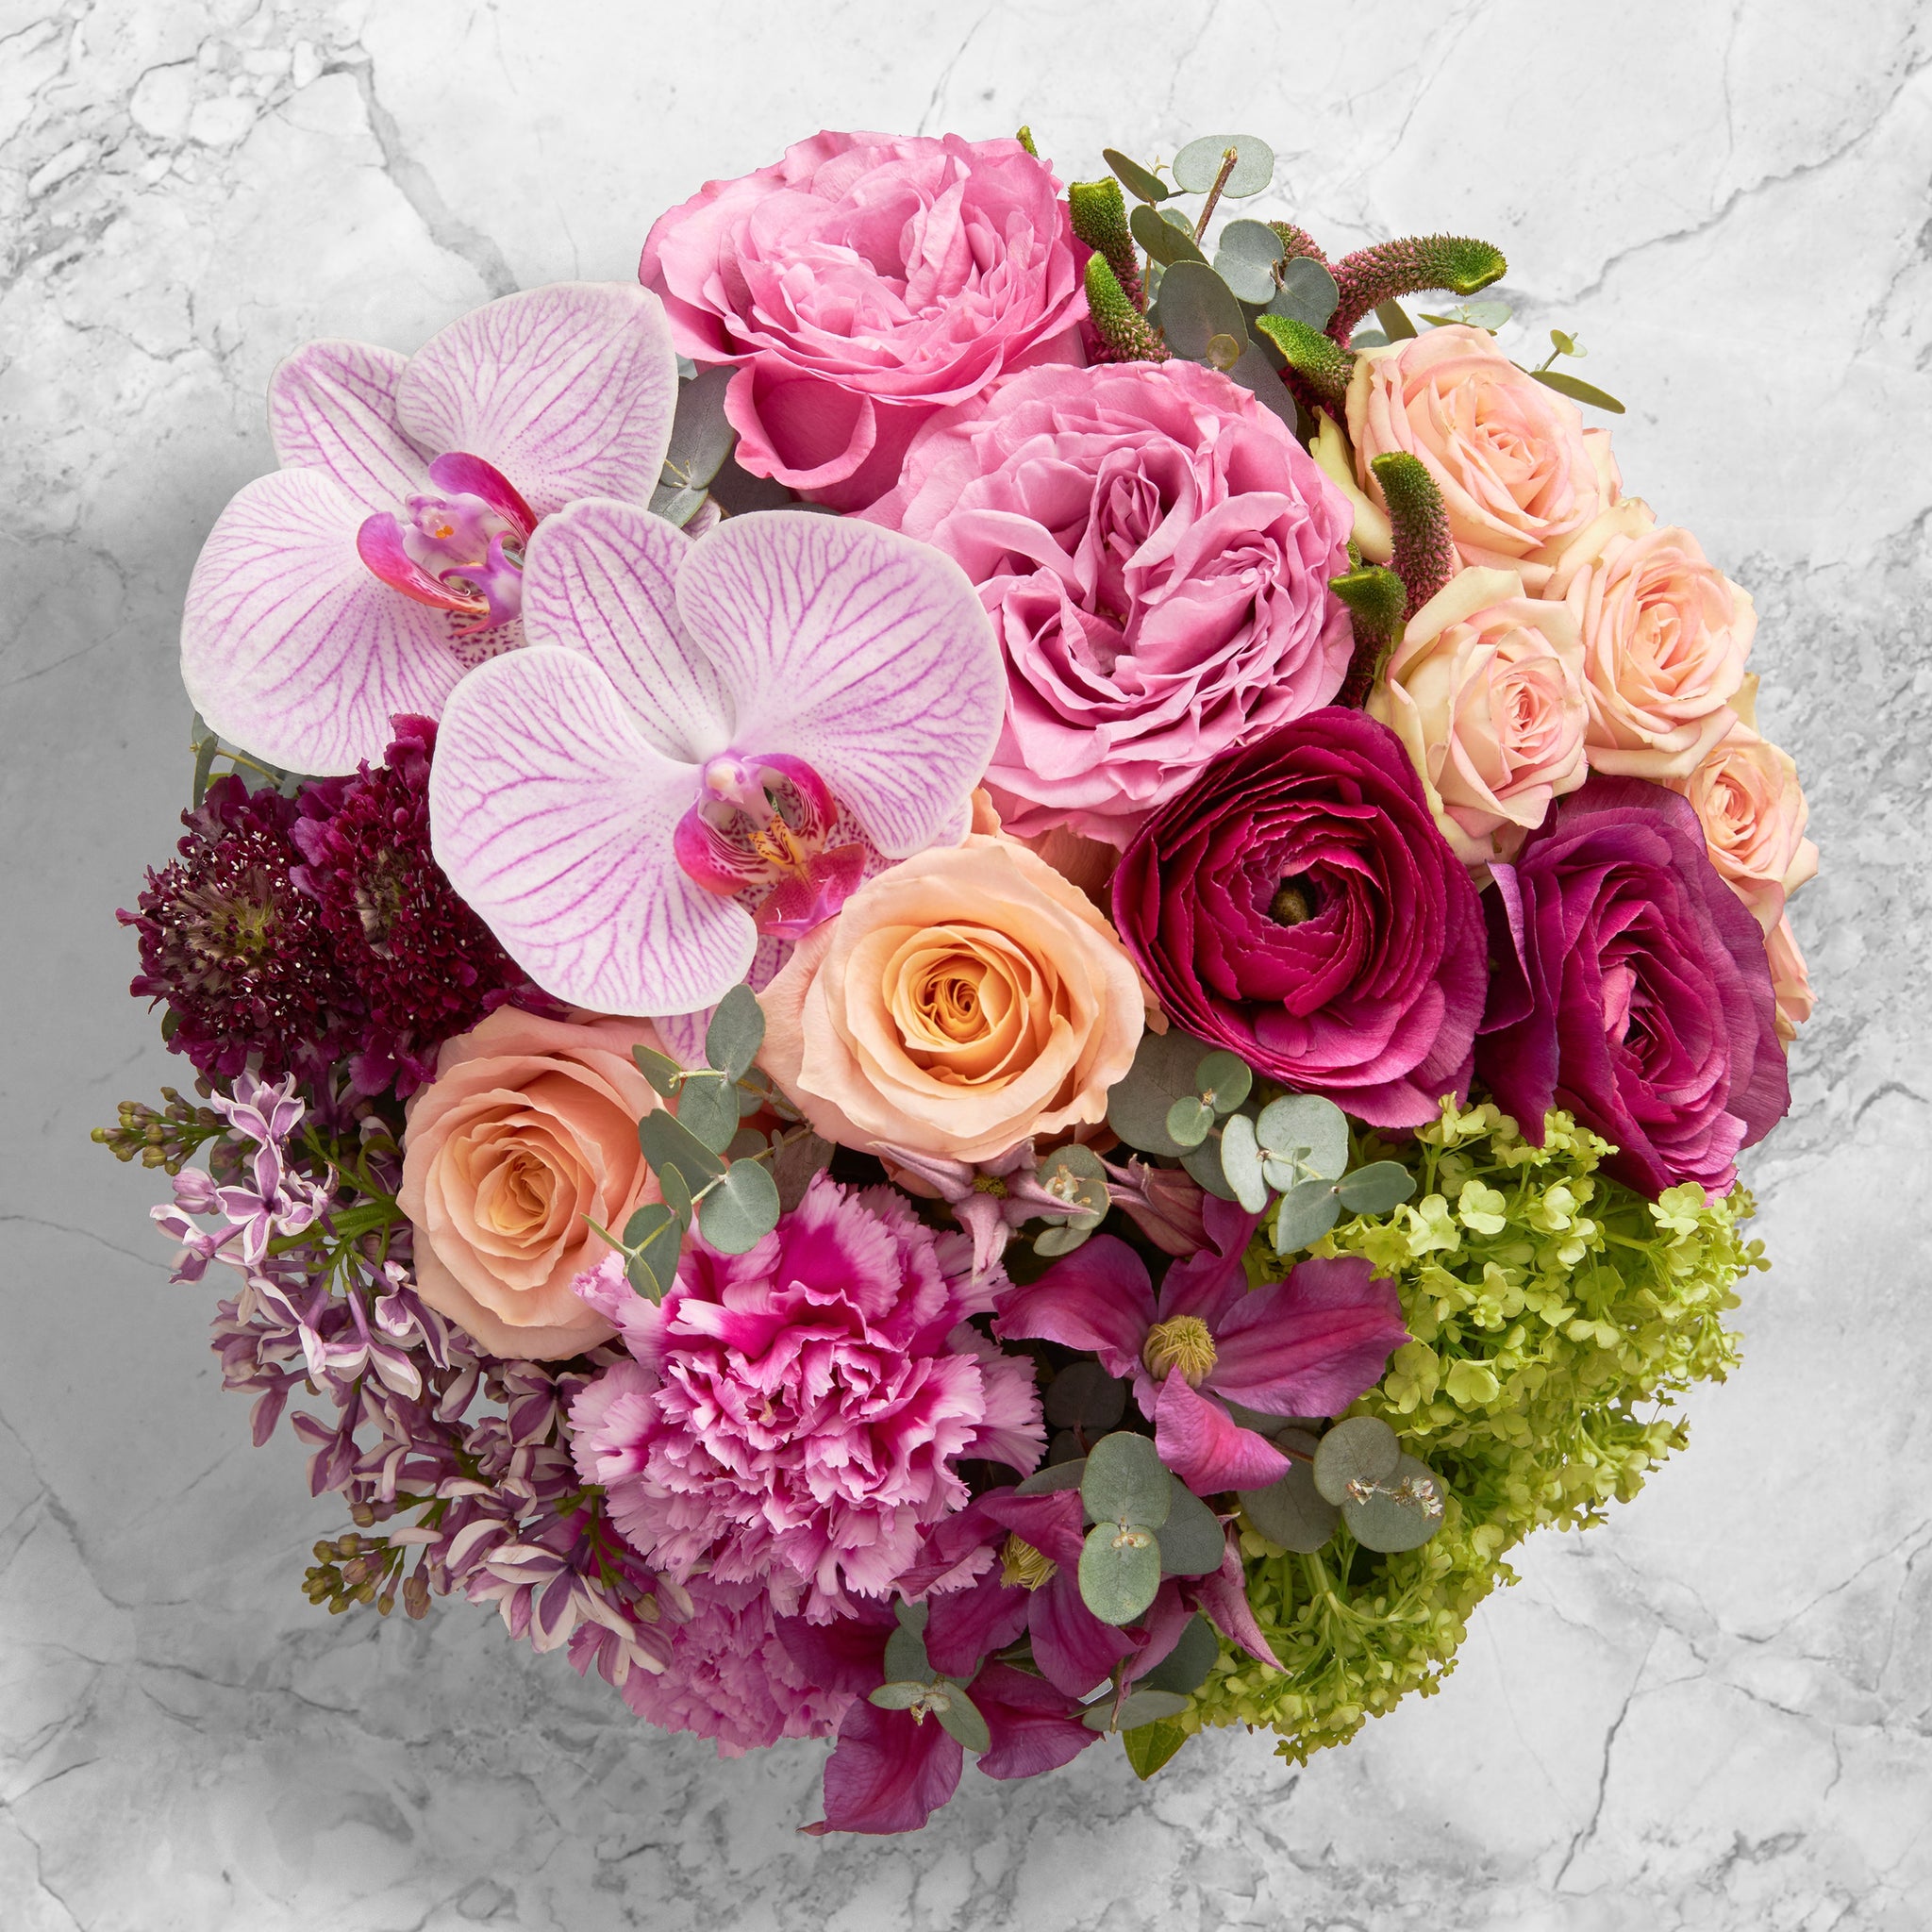 Neill Strain Floral Couture Mother's Day luxury flowers London